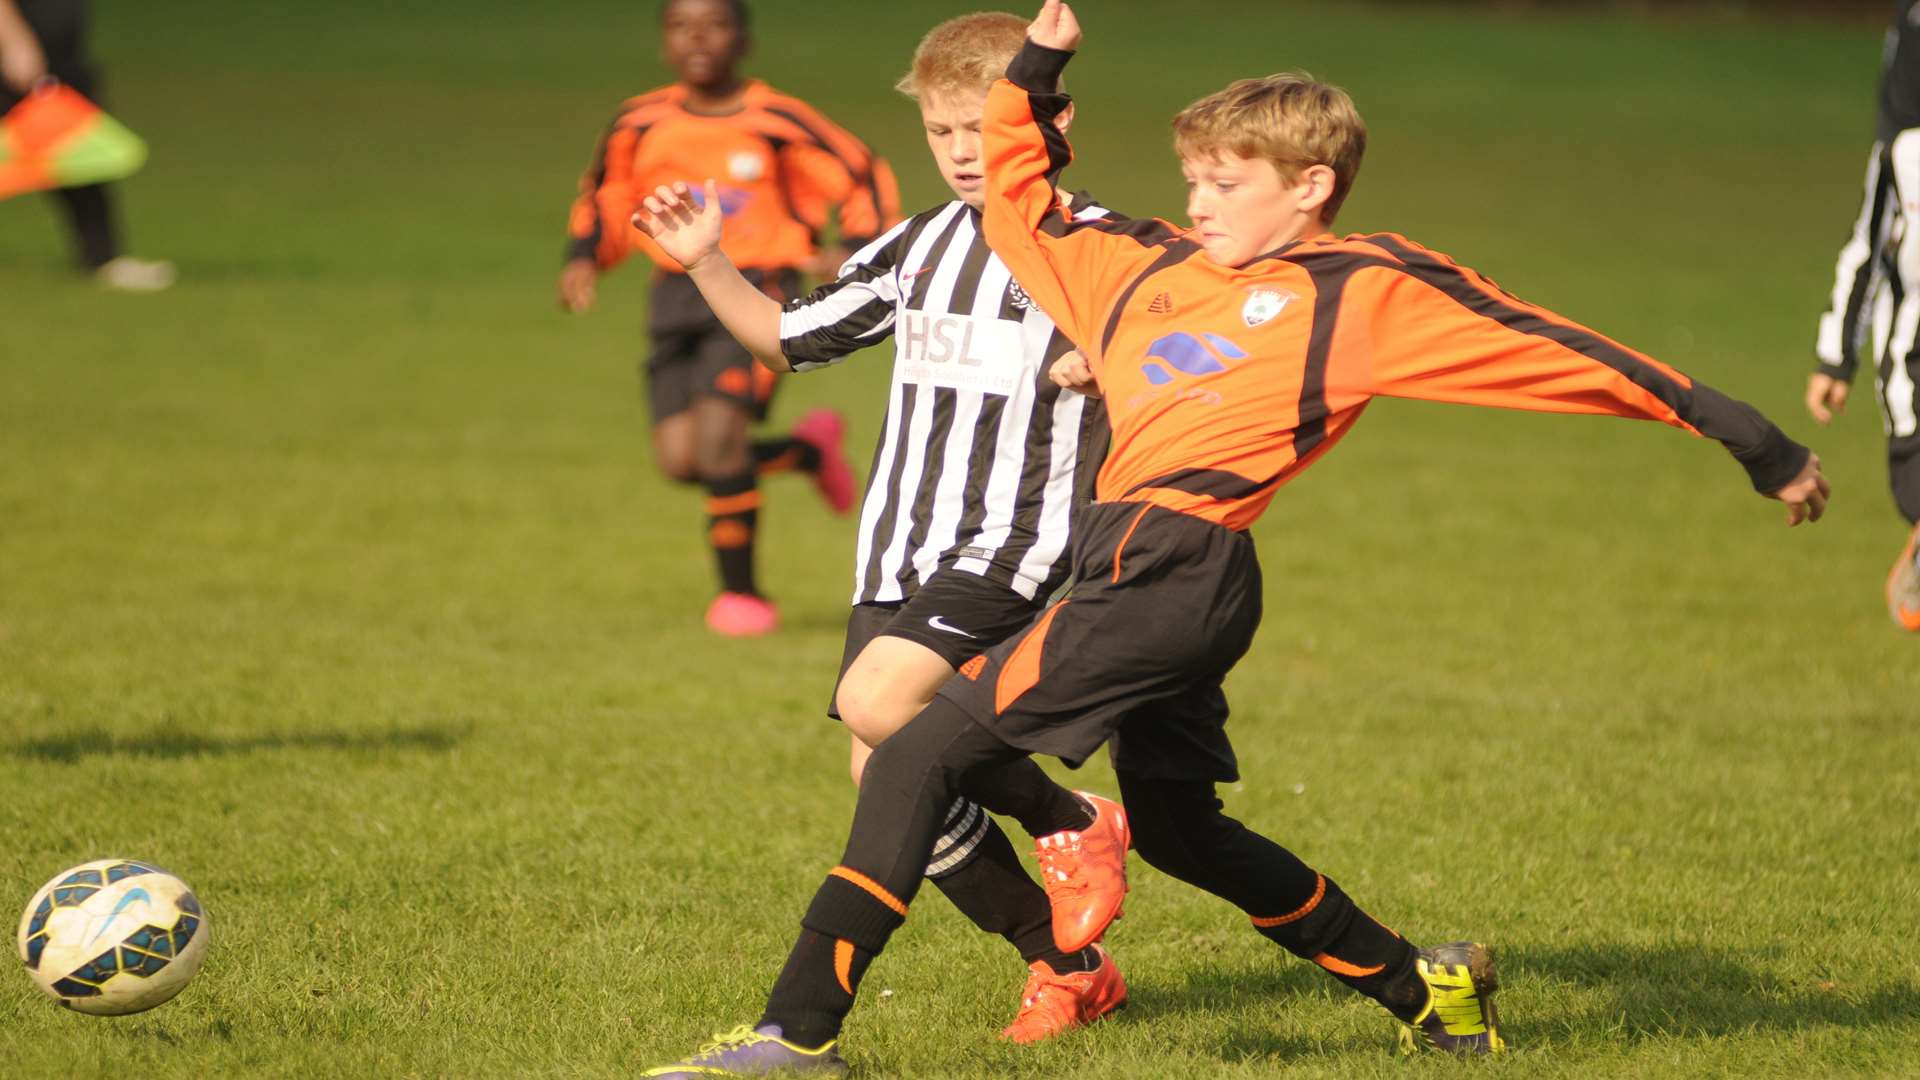 Lordswood Youth Tigers (orange) and Real 60 go for the same ball in Under-13 Division 1 Picture: Steve Crispe